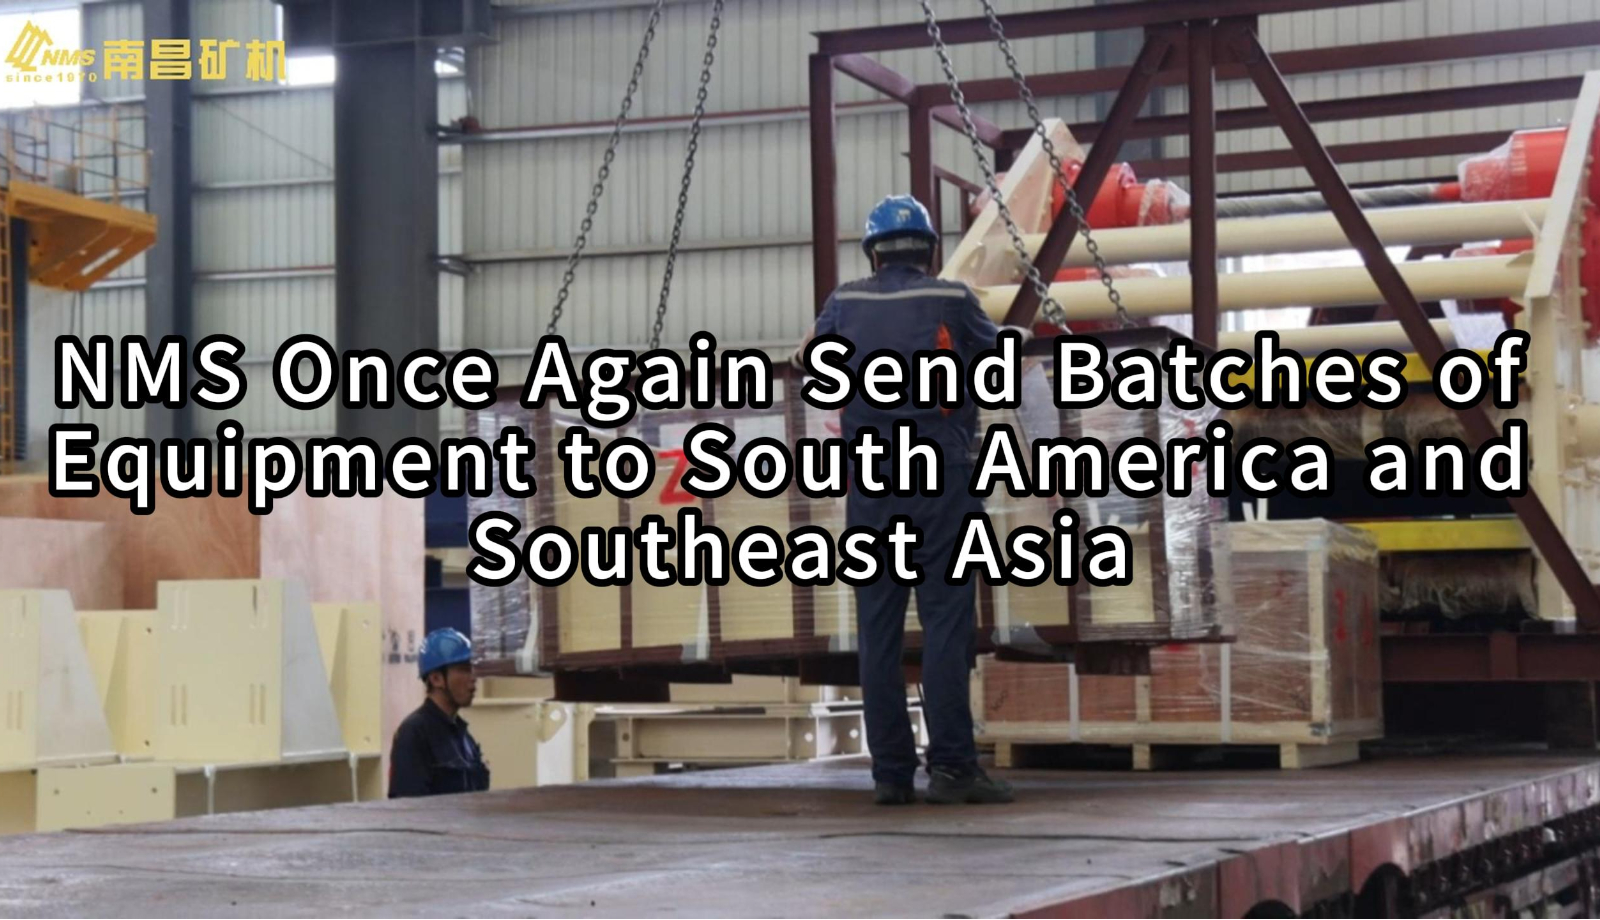 NMS Once Again Send Batches of Equipment to South America and Southeast Asia